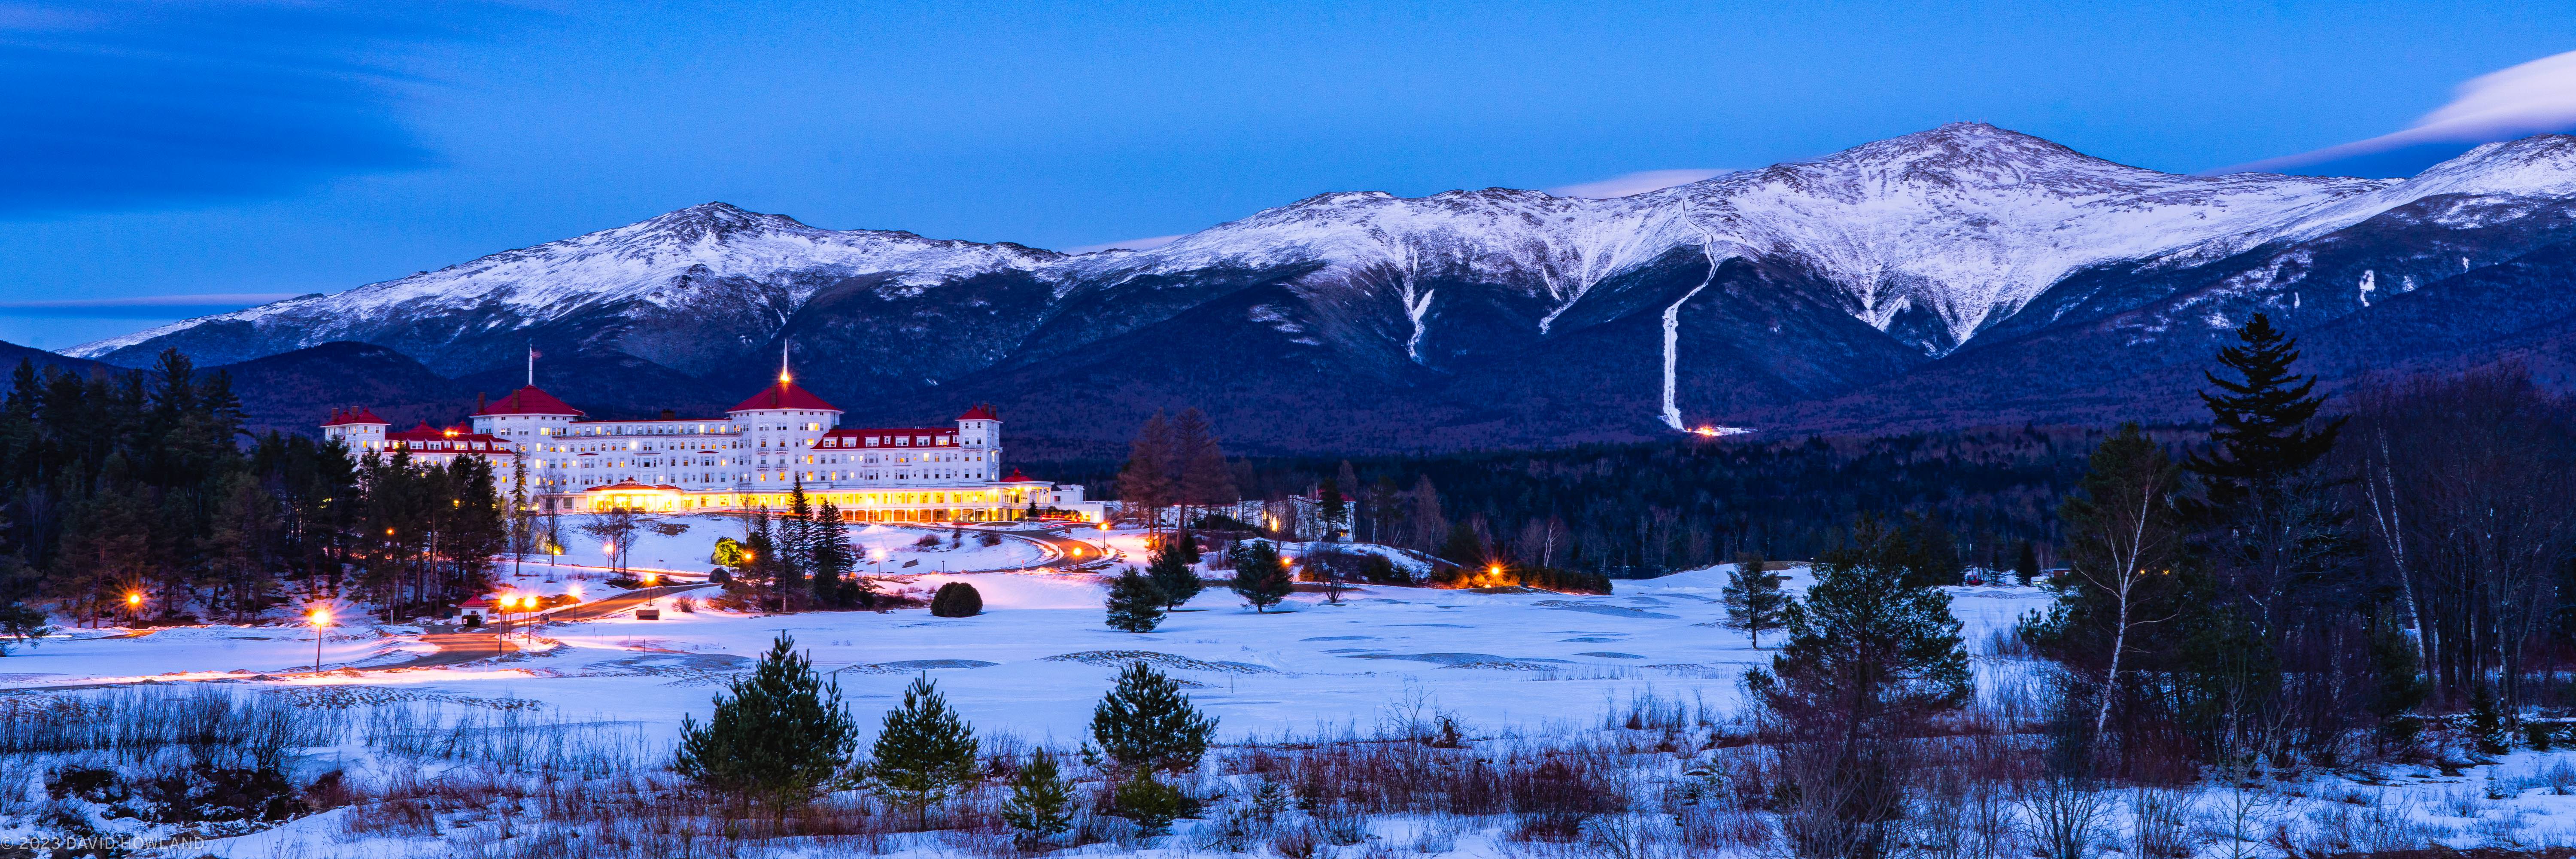 The Presidentials and the Mount Washington Hotel